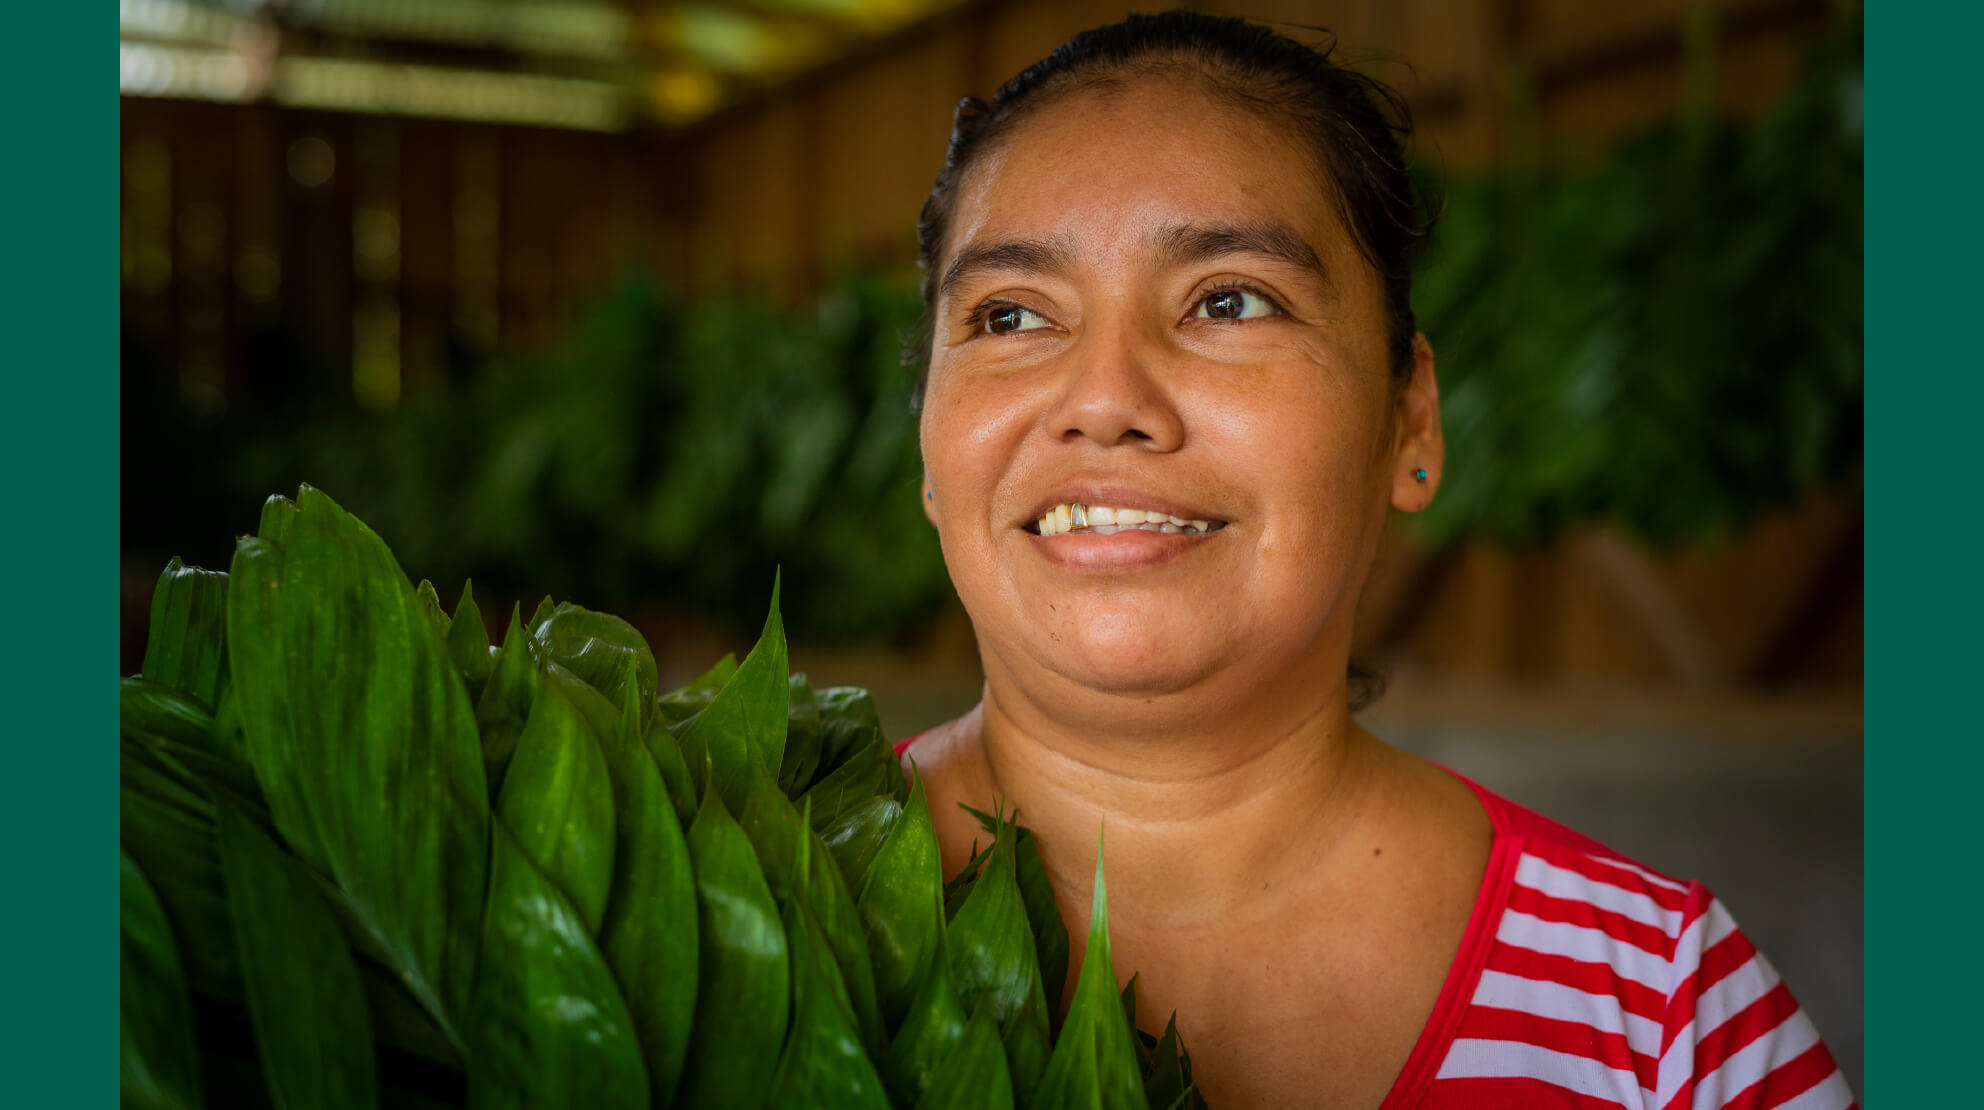 A smiling Indigenous woman holds a stack of palm leaves while looking in the distance.